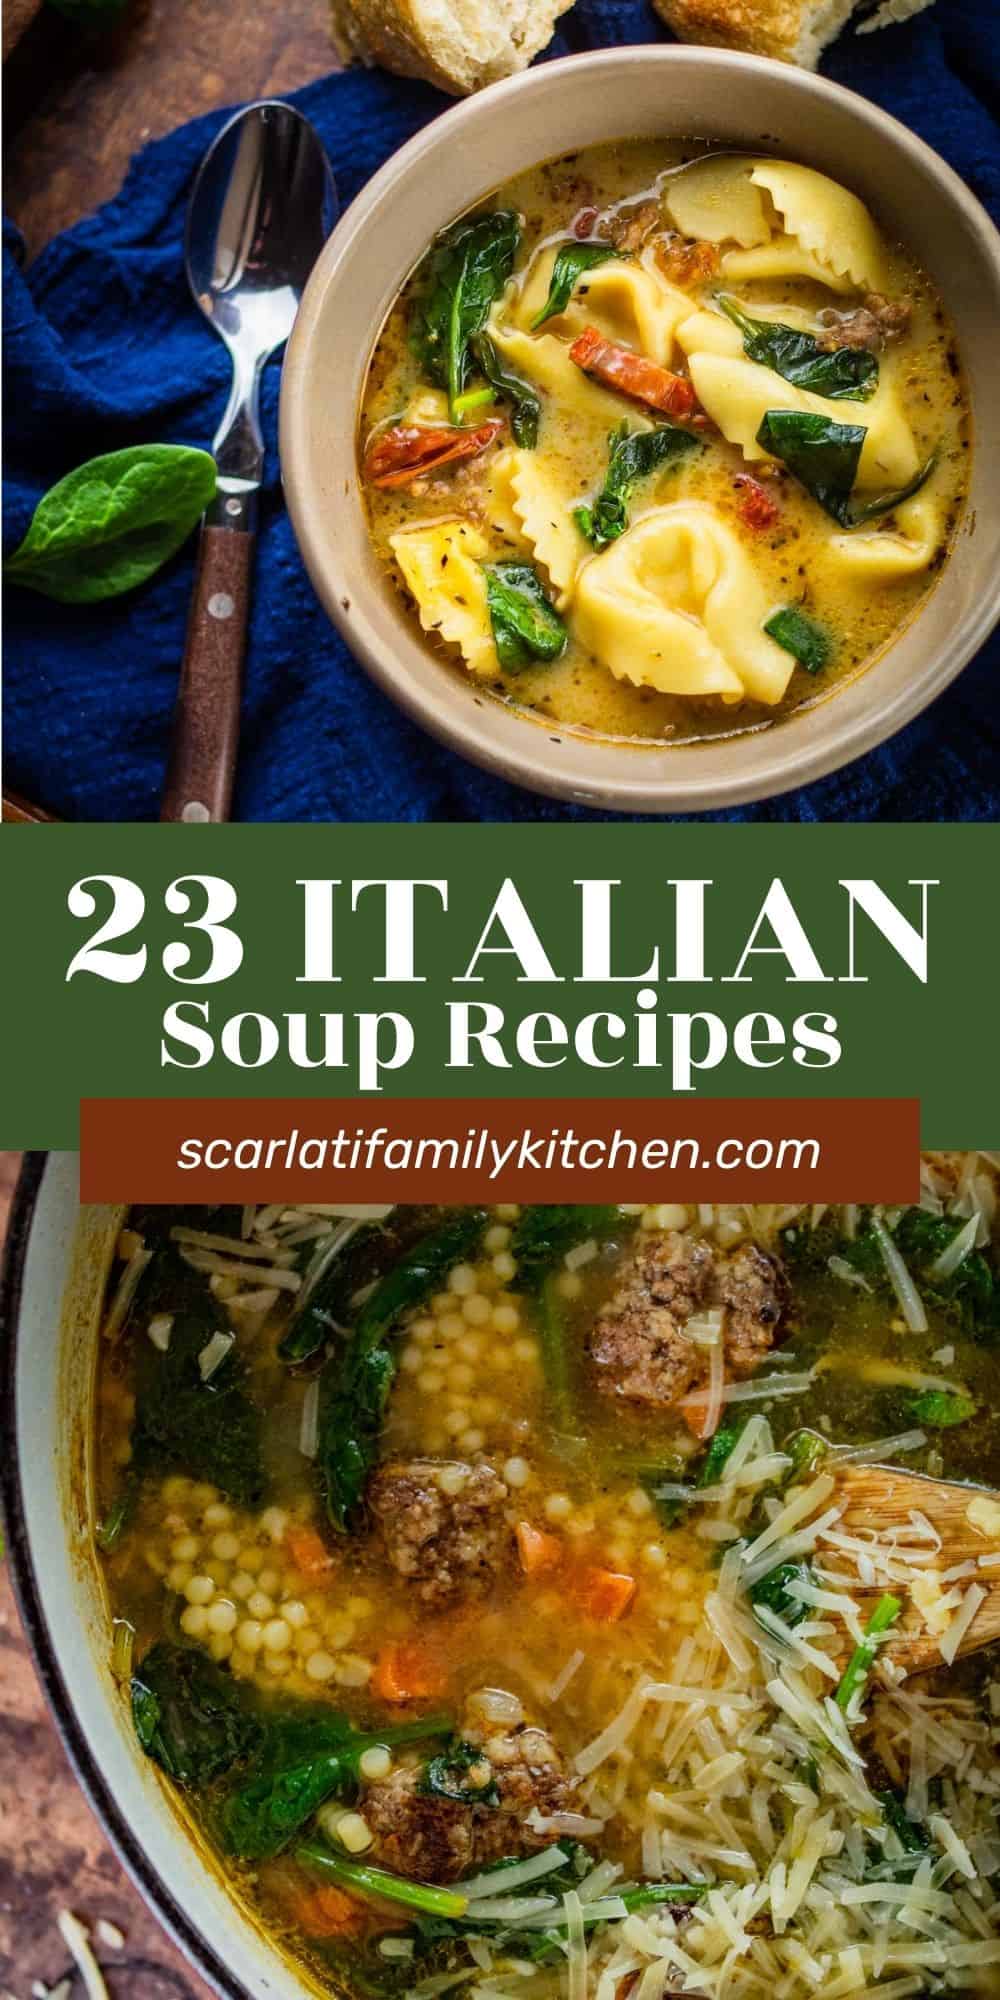 23 of the Best Recipes for Easy Italian Soup - Scarlati Family Kitchen